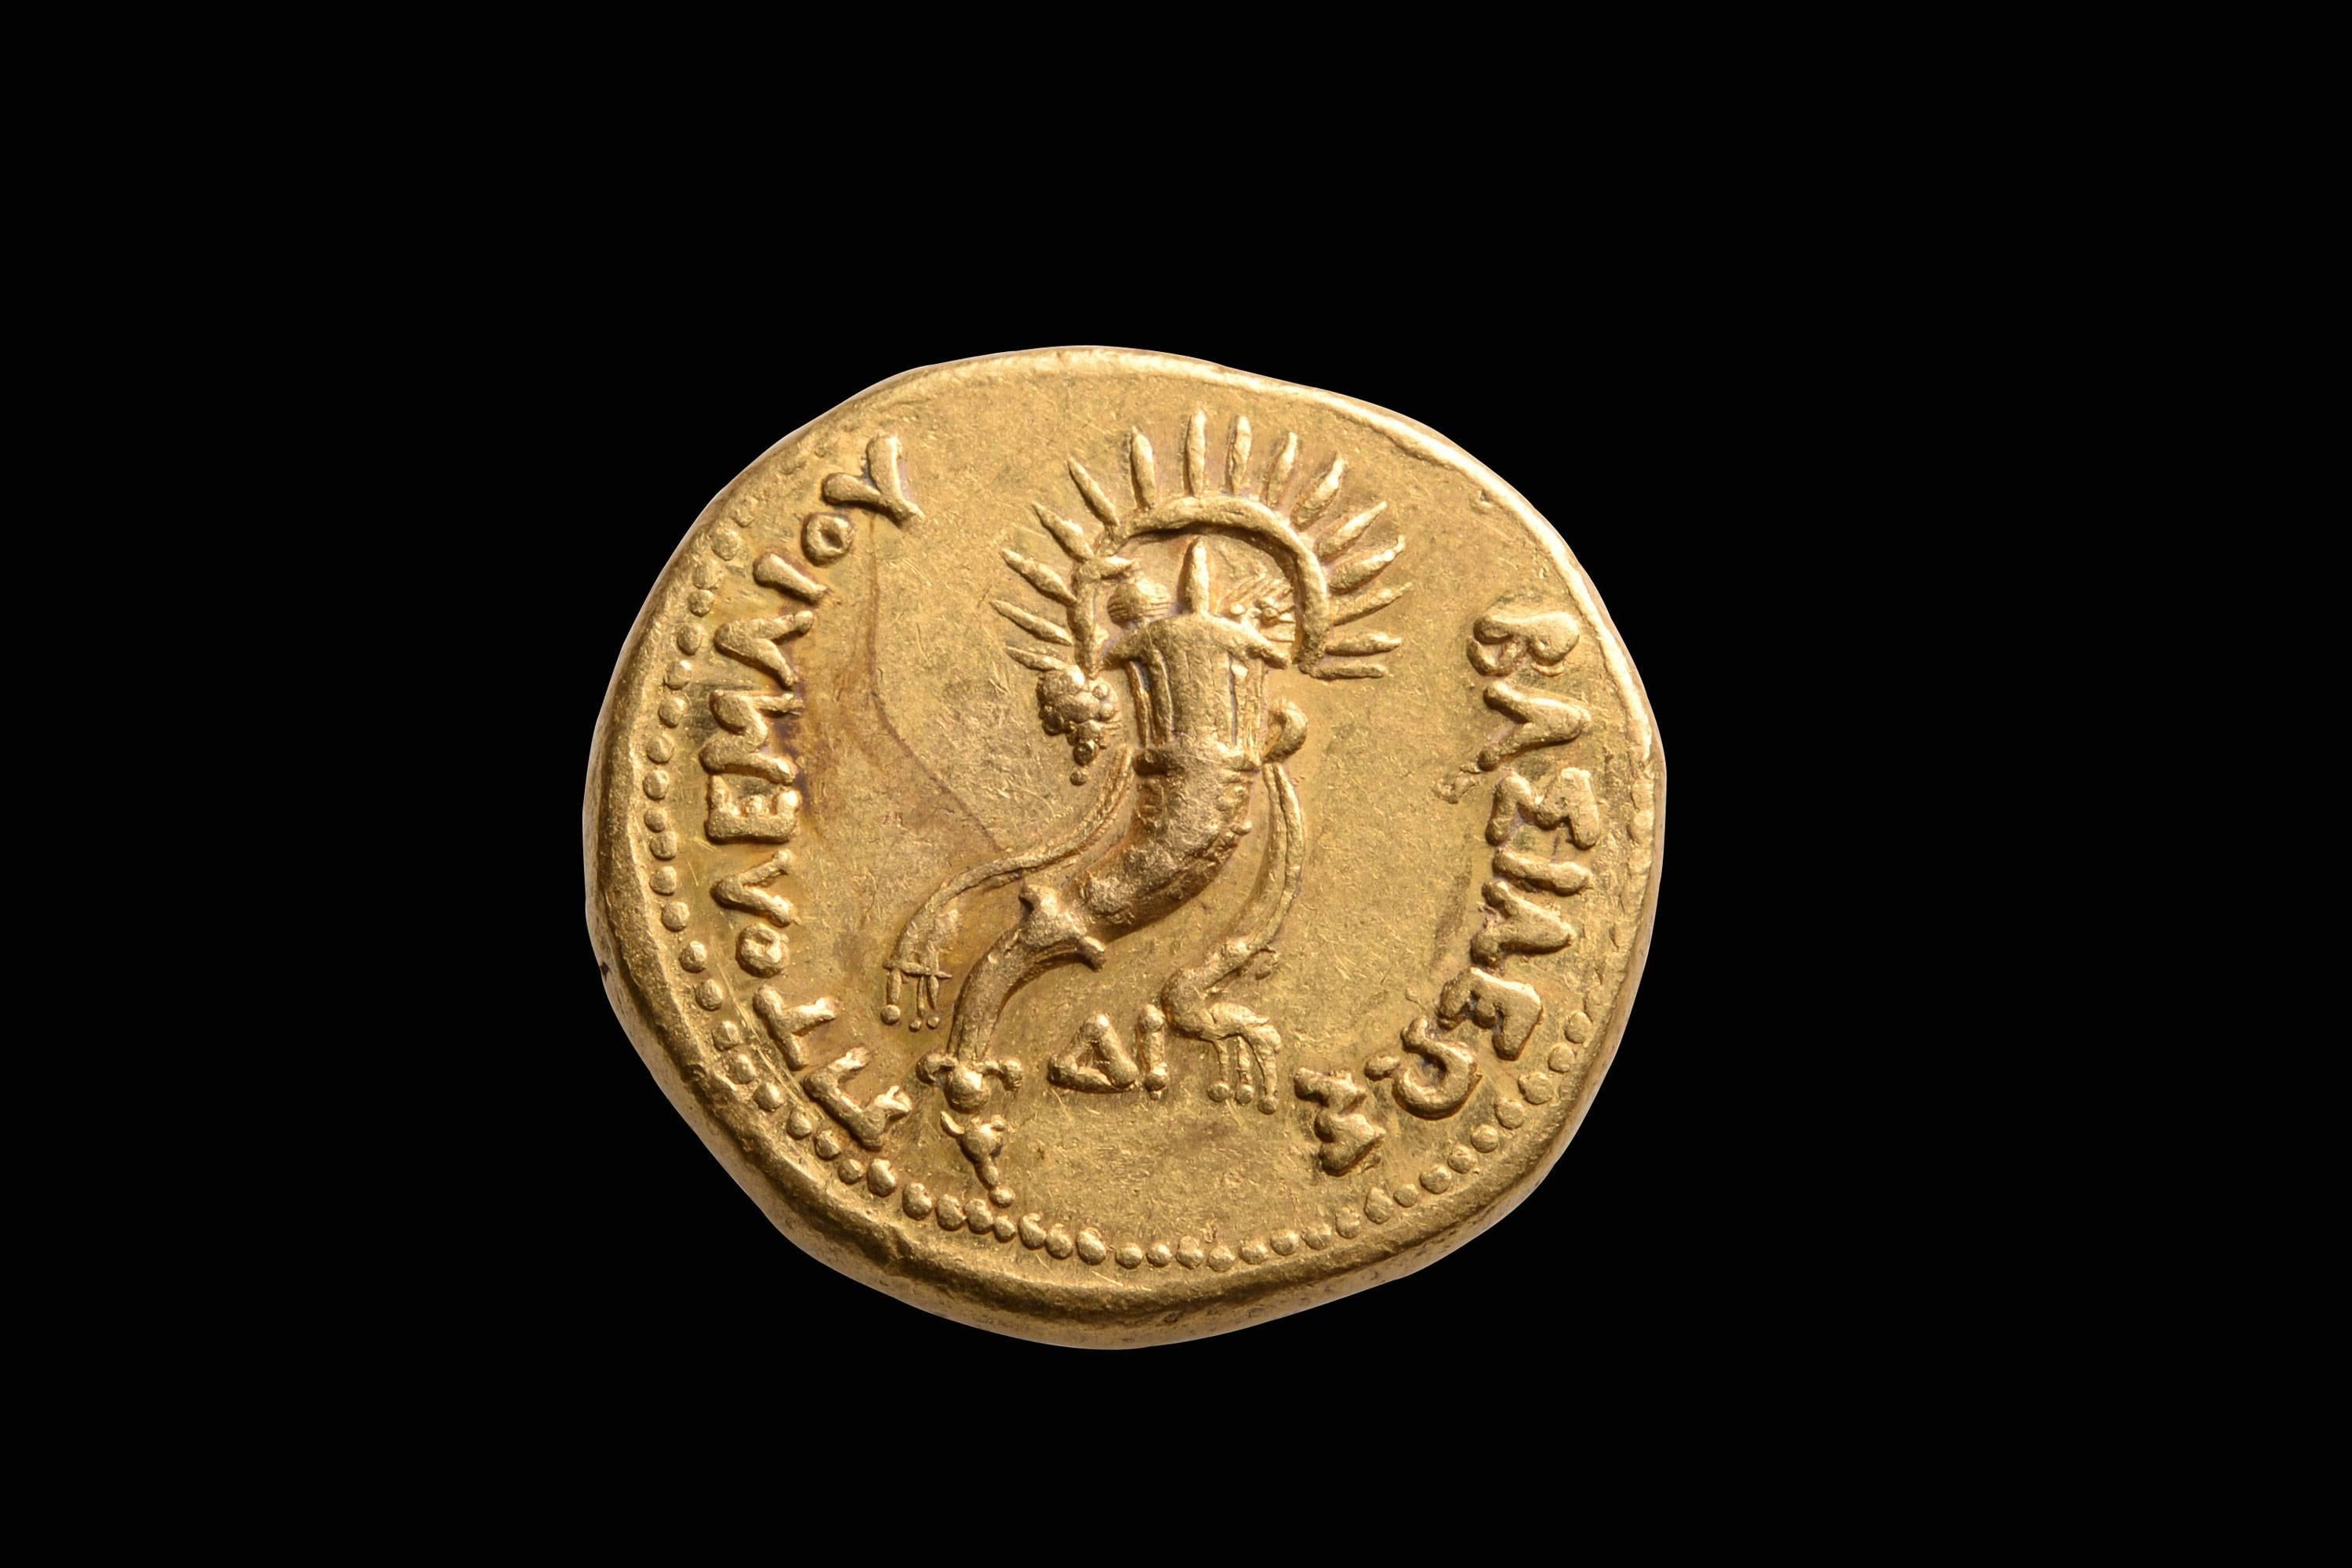 A superb, beautifully centred, lustrous example of one of the most impressive and valuable coins ever minted in the ancient world.

A solid gold Oktadrachm or Mnaïeion, issued under Ptolemy IV Philopator, in honour of his predecessor and father,